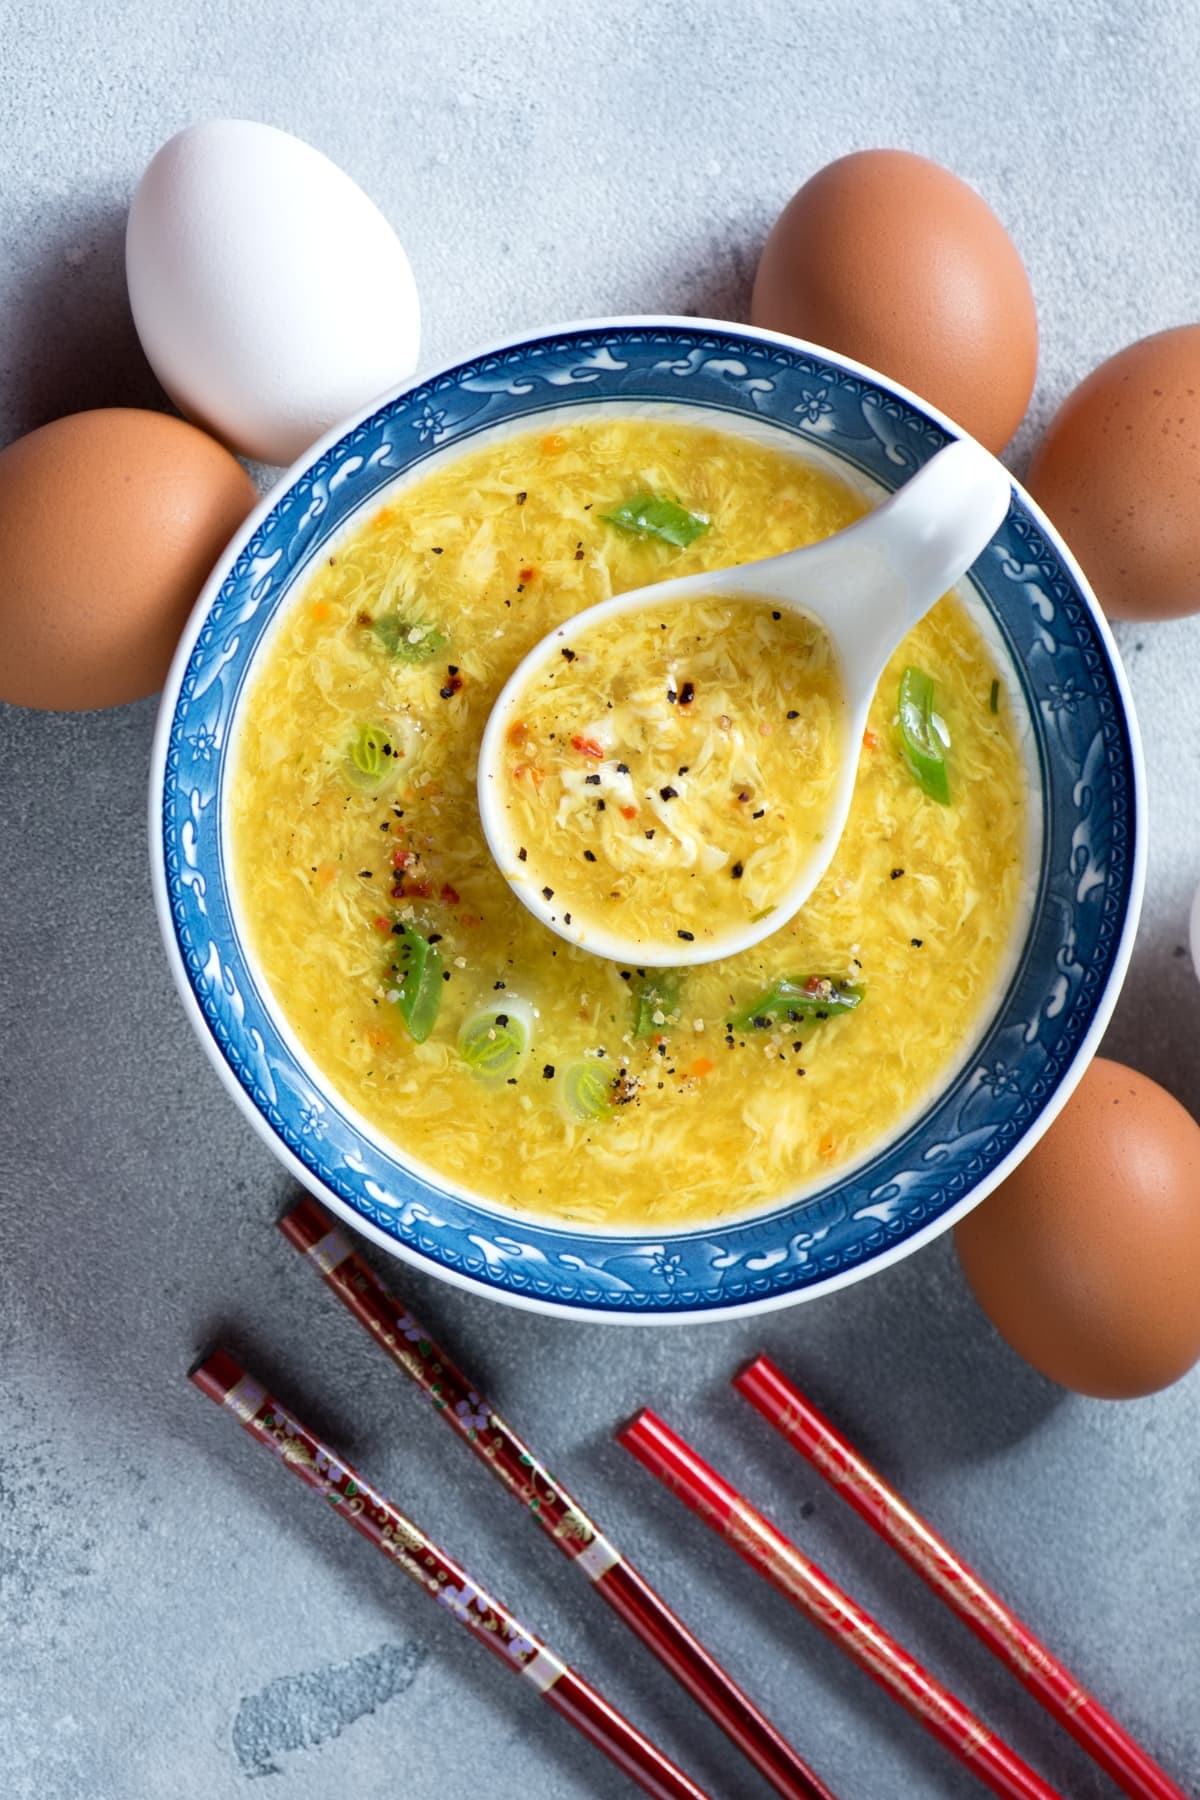 A Chinese bowl with egg drop soup garnished with chopped green onions and seasonings with chopsticks and raw eggs around it.